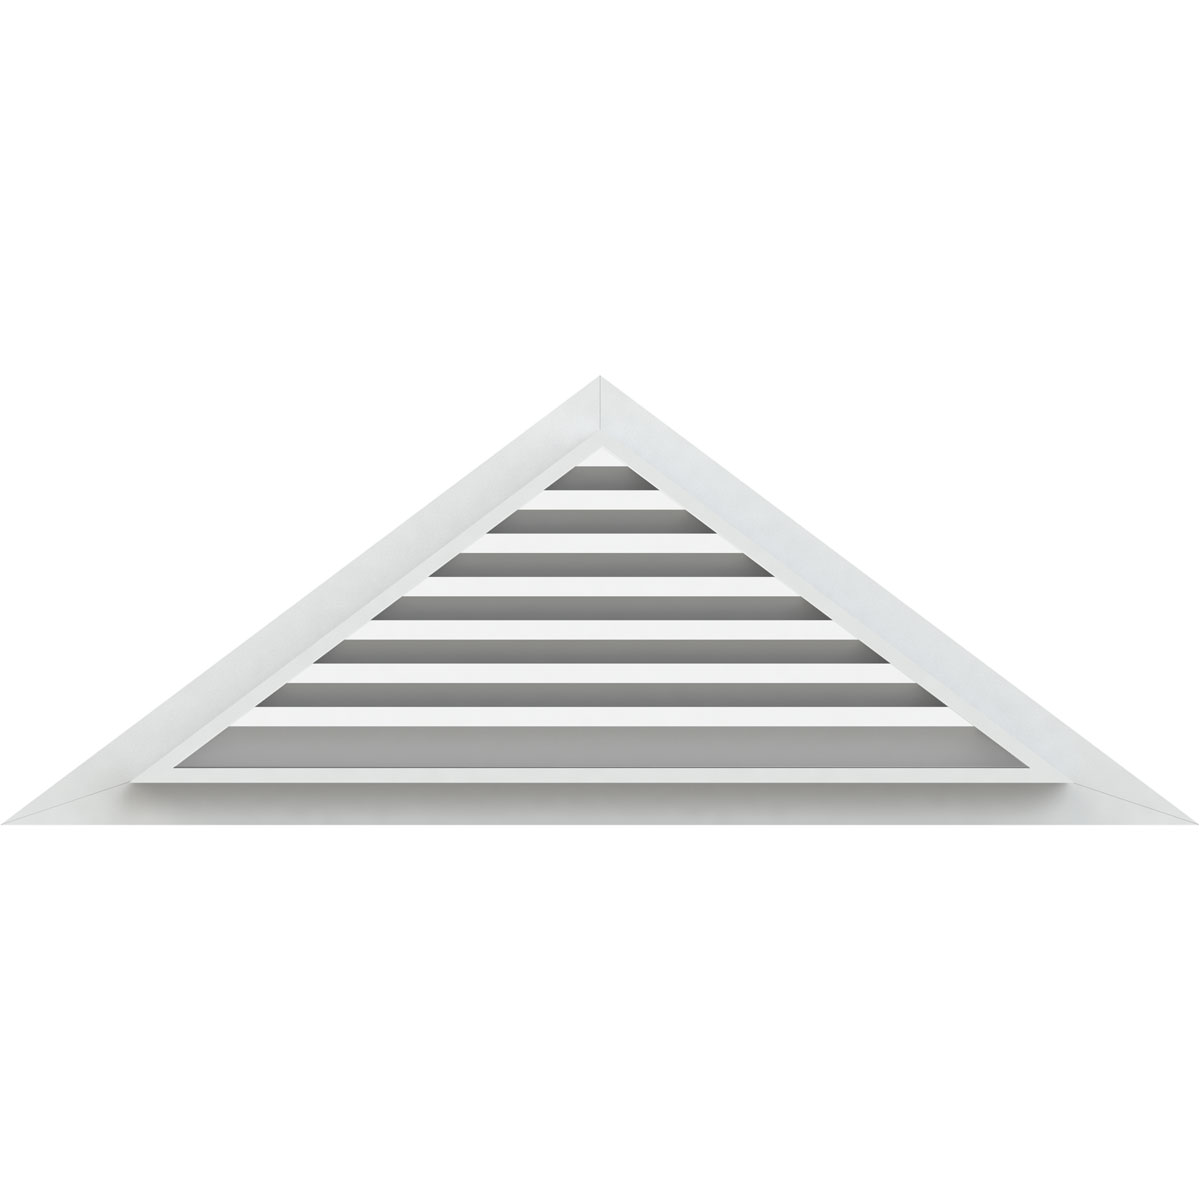 Ekena Millwork 36"W x 15"H Triangle Gable Vent (49 3/4"W x 20 3/4"H Frame Size) 10/12 Pitch Functional, PVC Gable Vent with 1" x 4" Flat Trim Frame - image 4 of 14